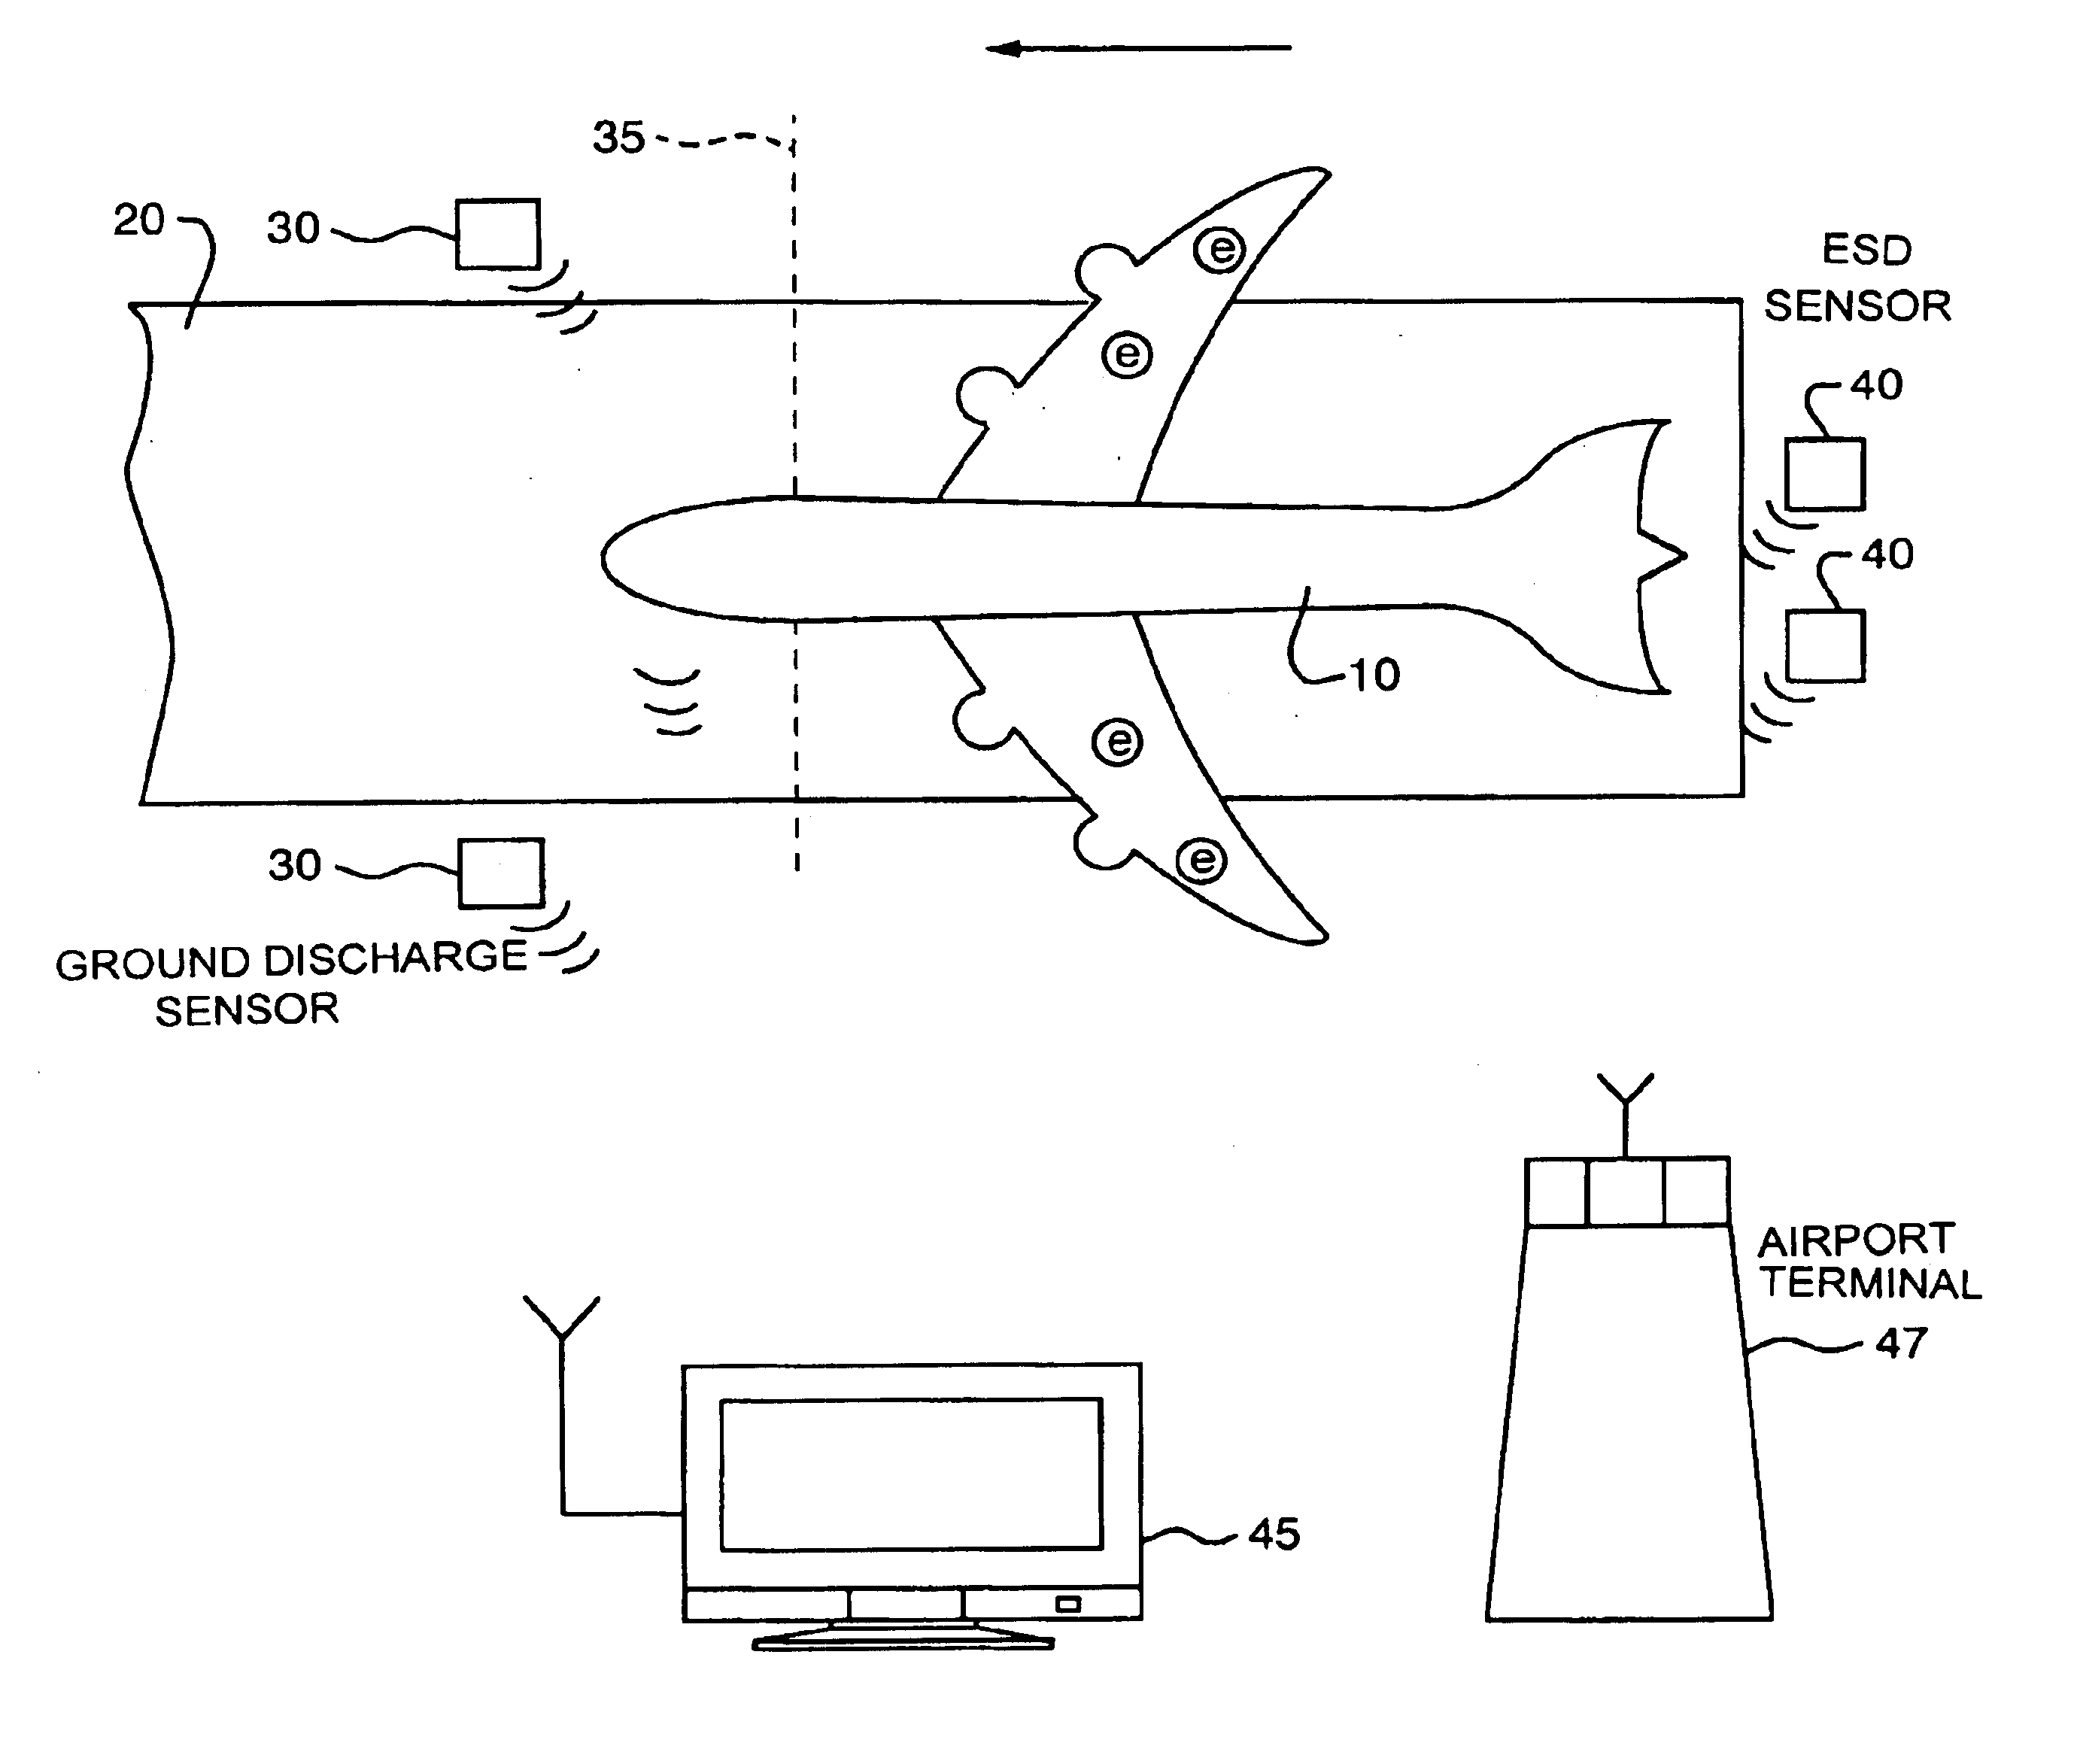 Aircraft electrostatic discharge test system